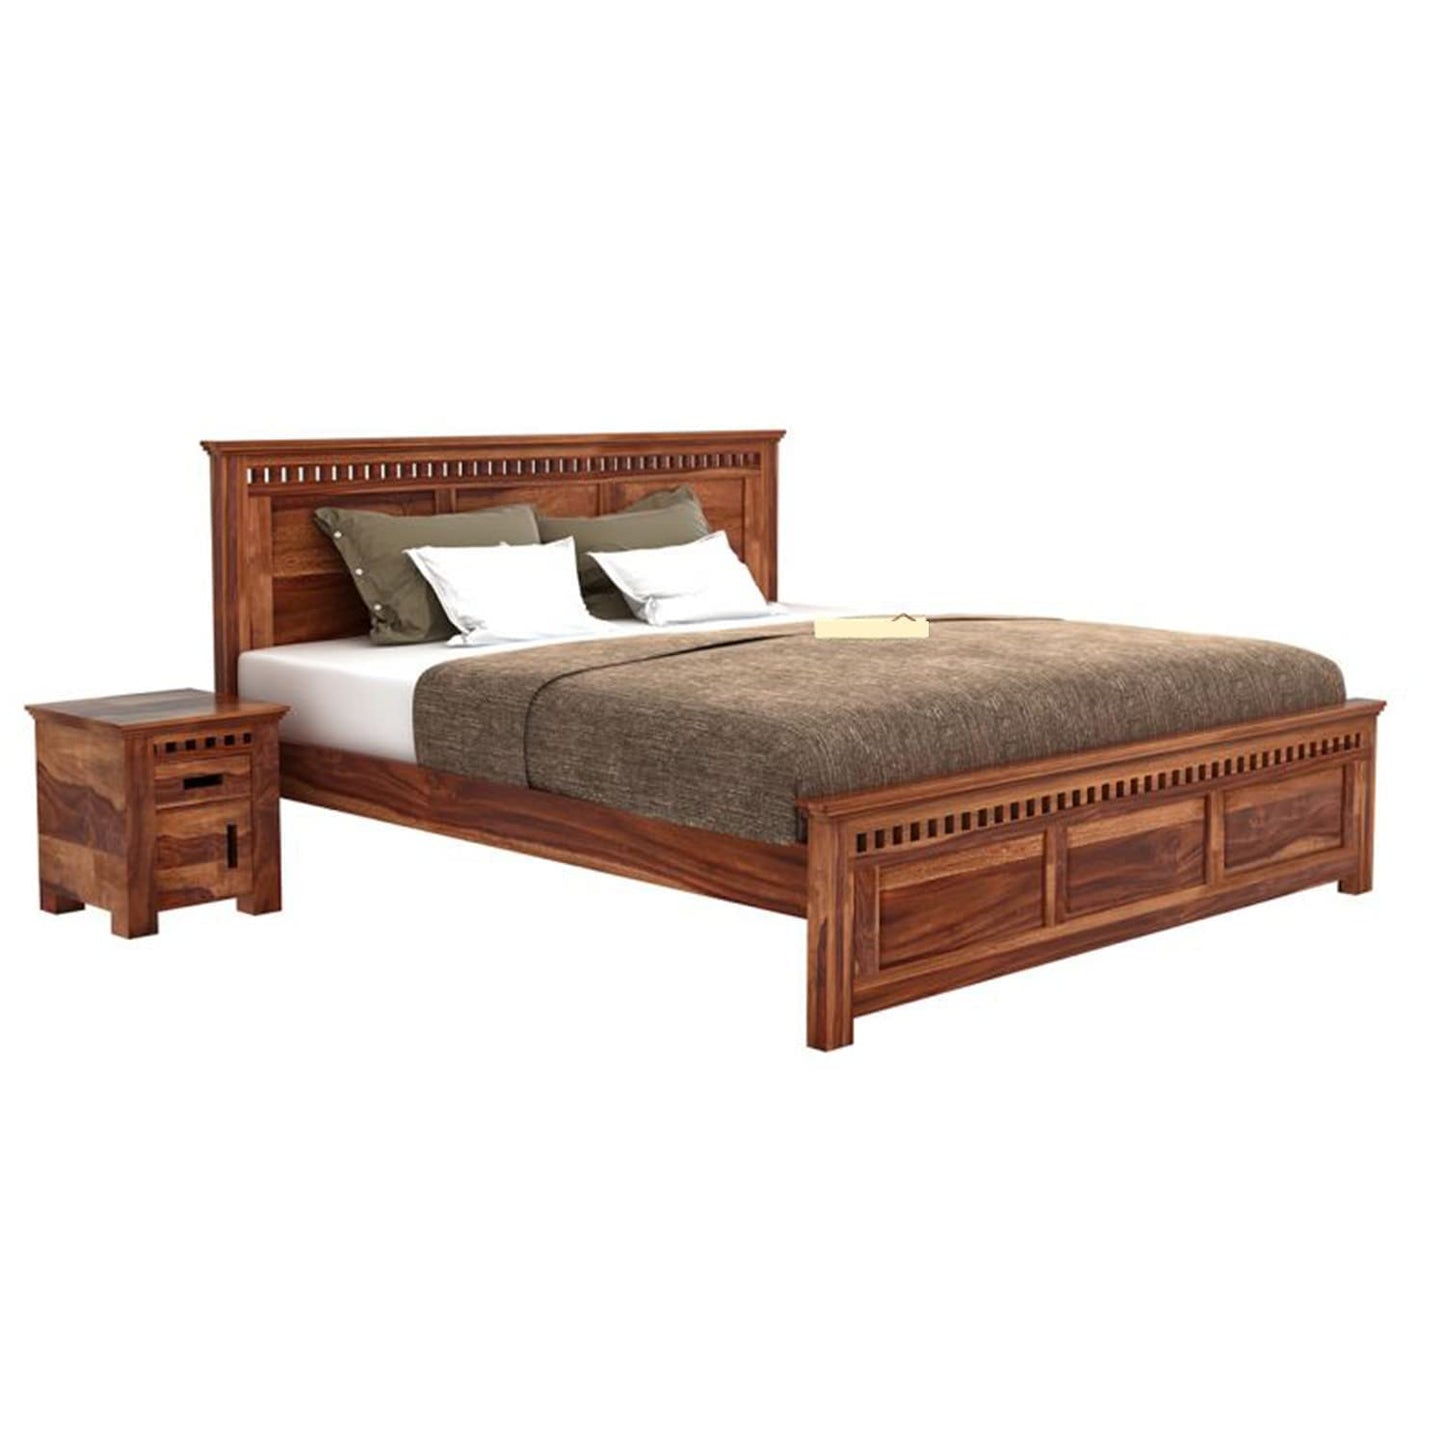 Weehom Furniture - Kuber Solid Wood Sheesham Bed | Without Storage